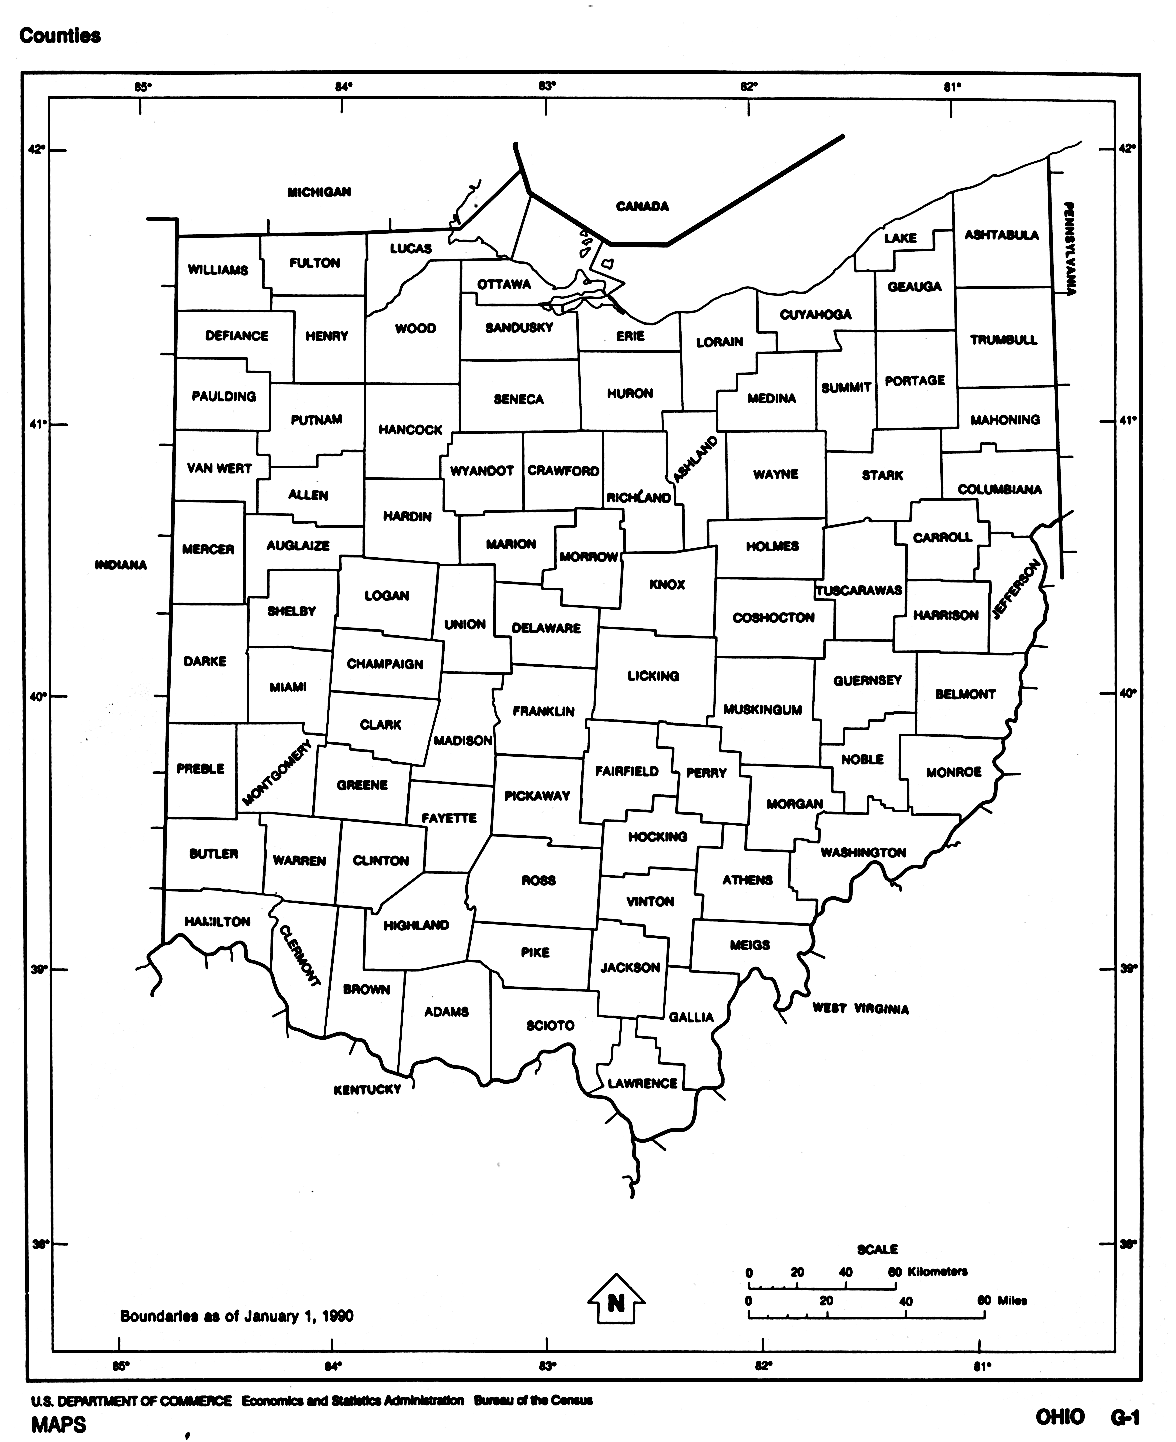 Ohio Counties map with location and outline of each county in OH